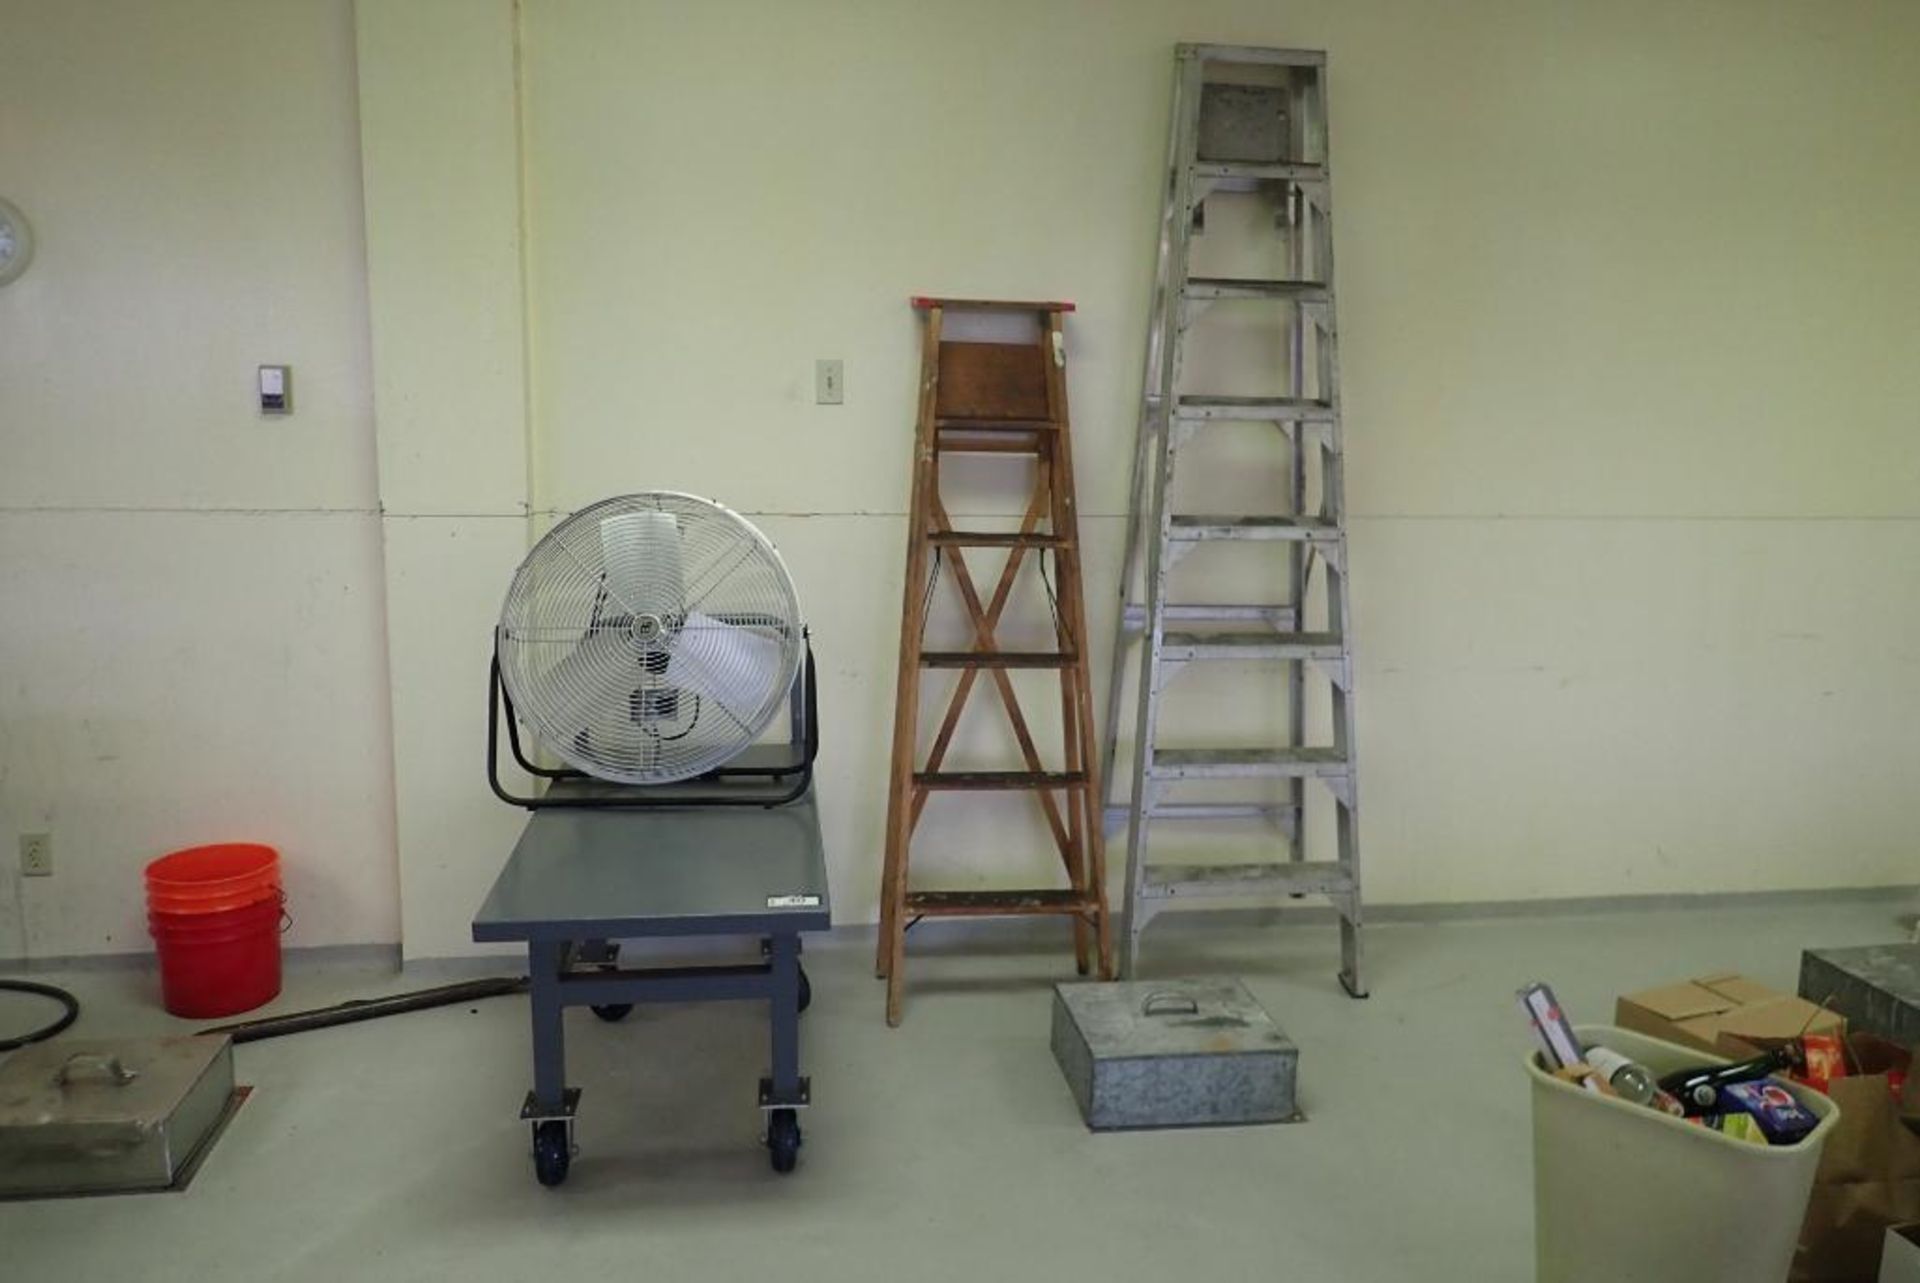 Lot of Mobile 2-Tier Cart, Fan, Wooden Step Ladder and Aluminum Step Ladder.